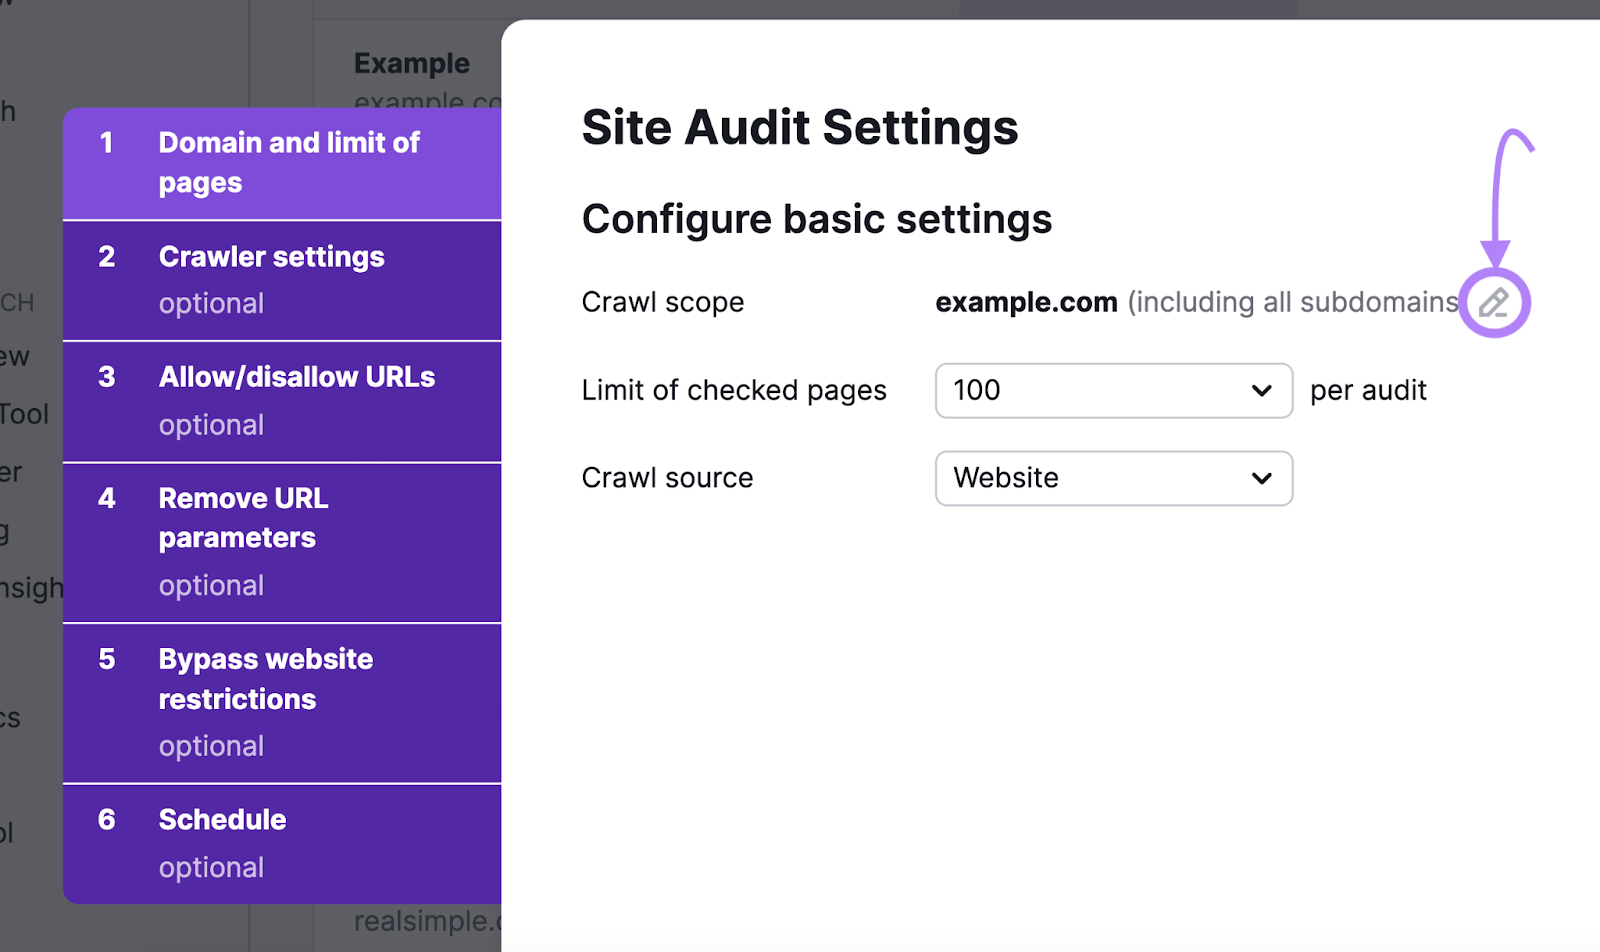 “1. Domain and limit of pages” tab in Site Audit Settings